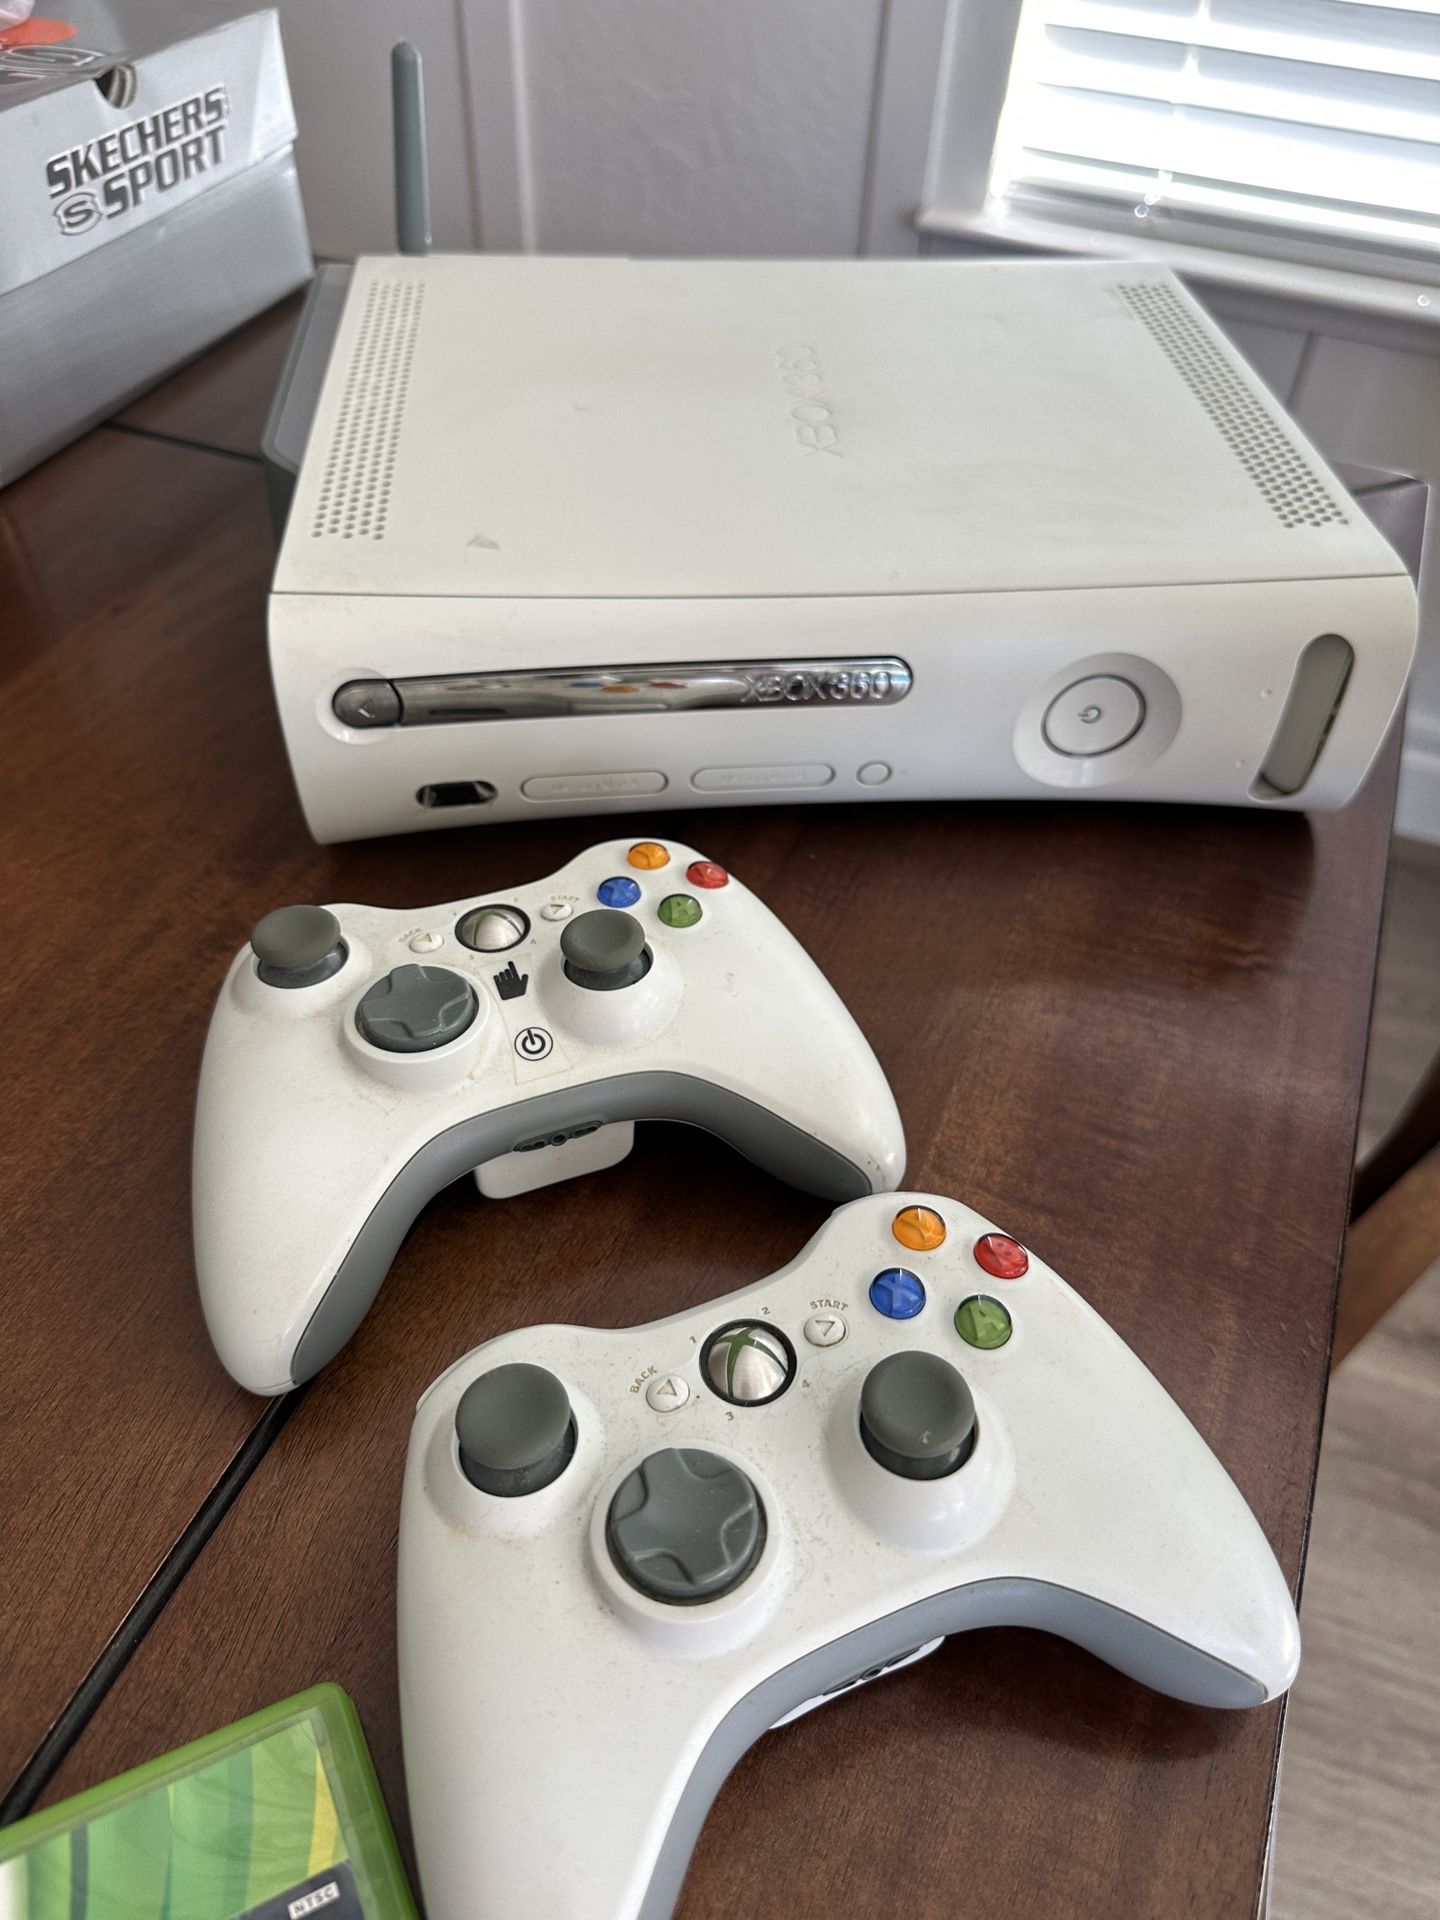 Xbox 360, Wireless Connection and Games